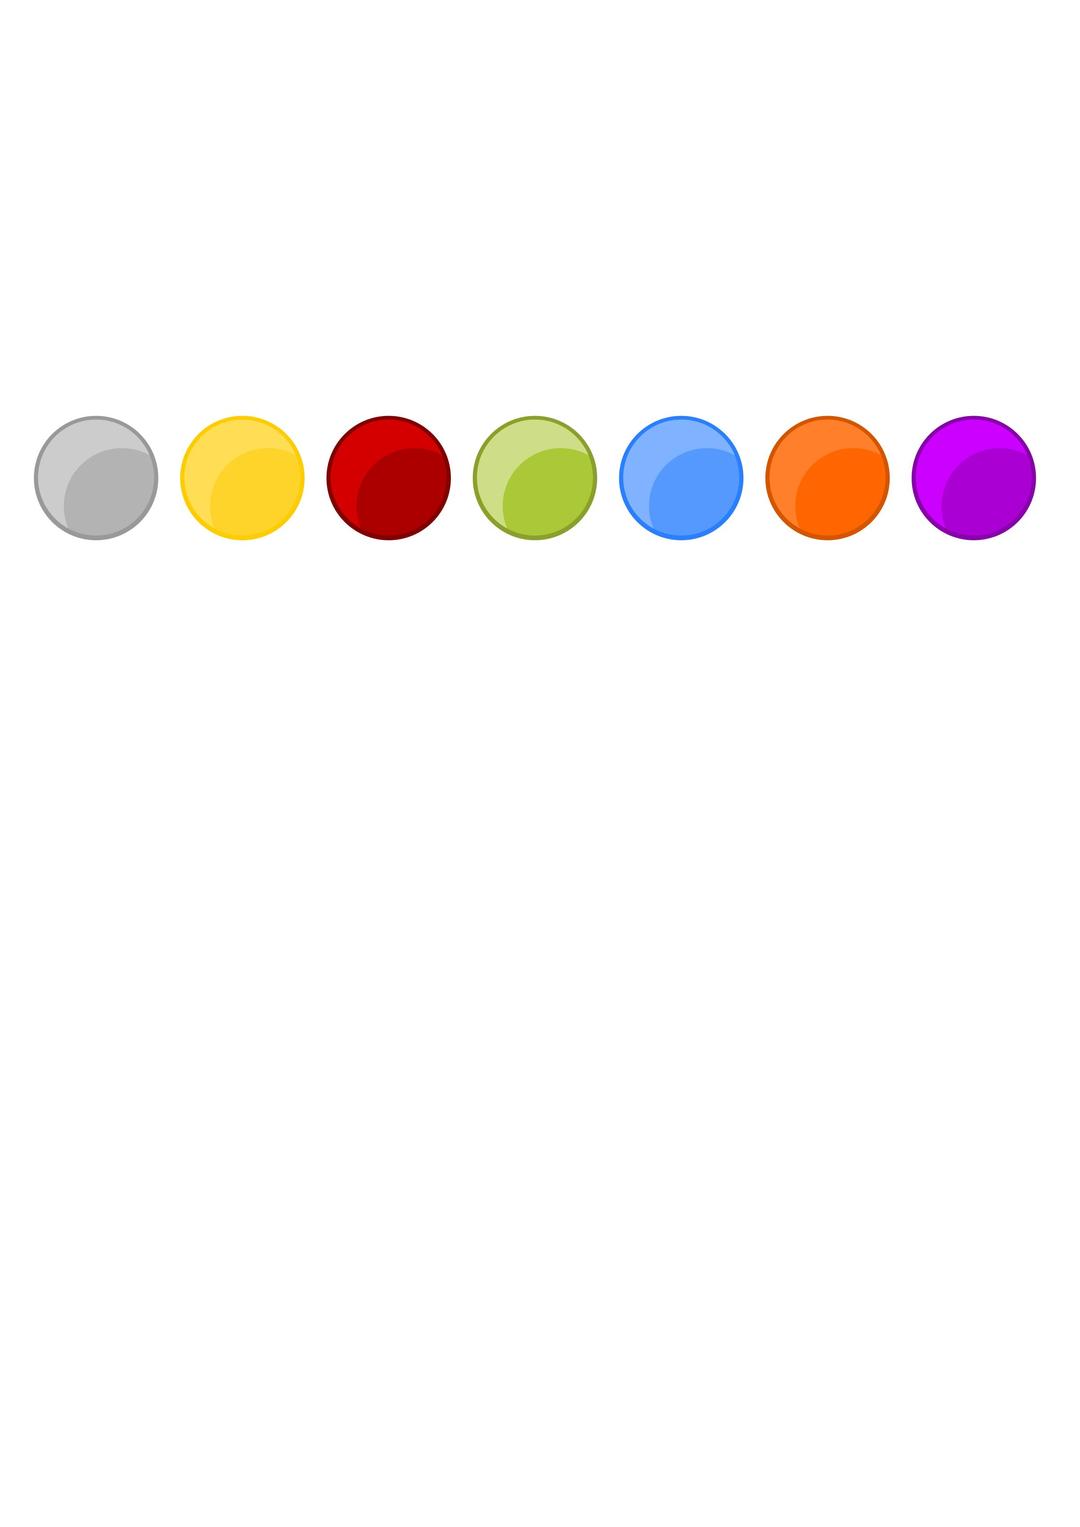 Colorful Circle Icon Backgrounds png transparent